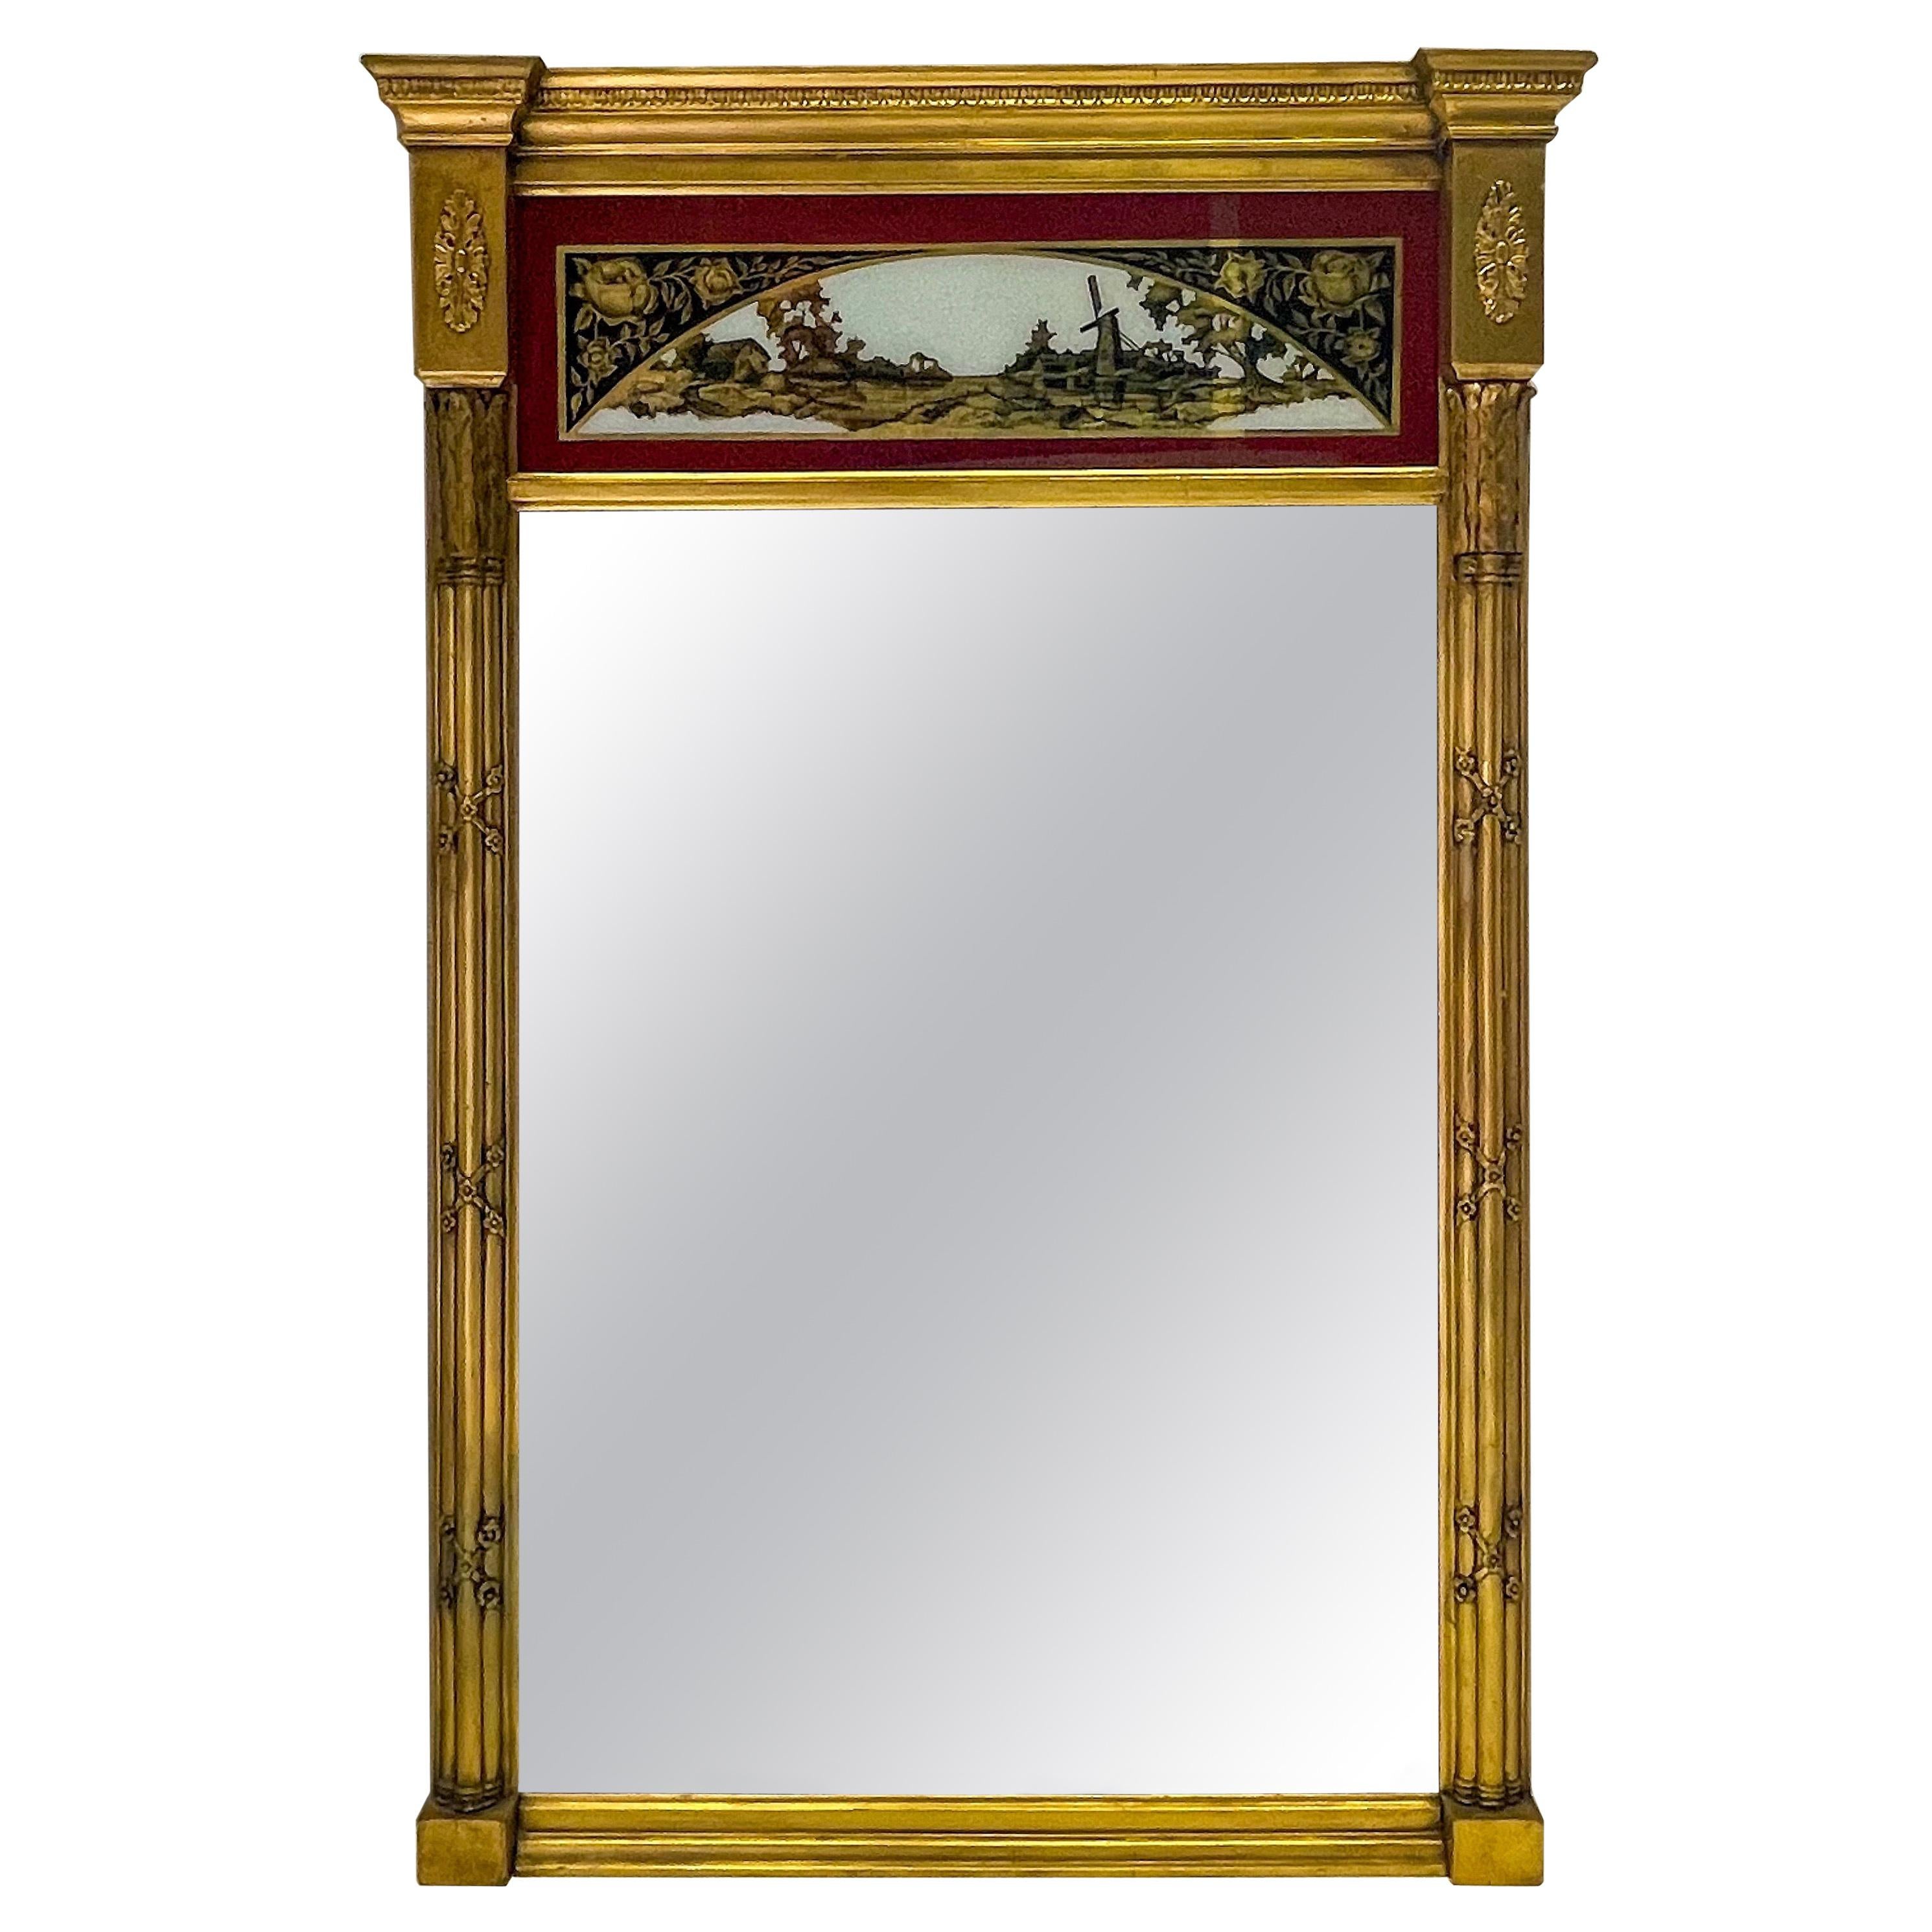 19th C. French Neoclassical Water Gilt Eglomise Trumeau Mirror For Sale